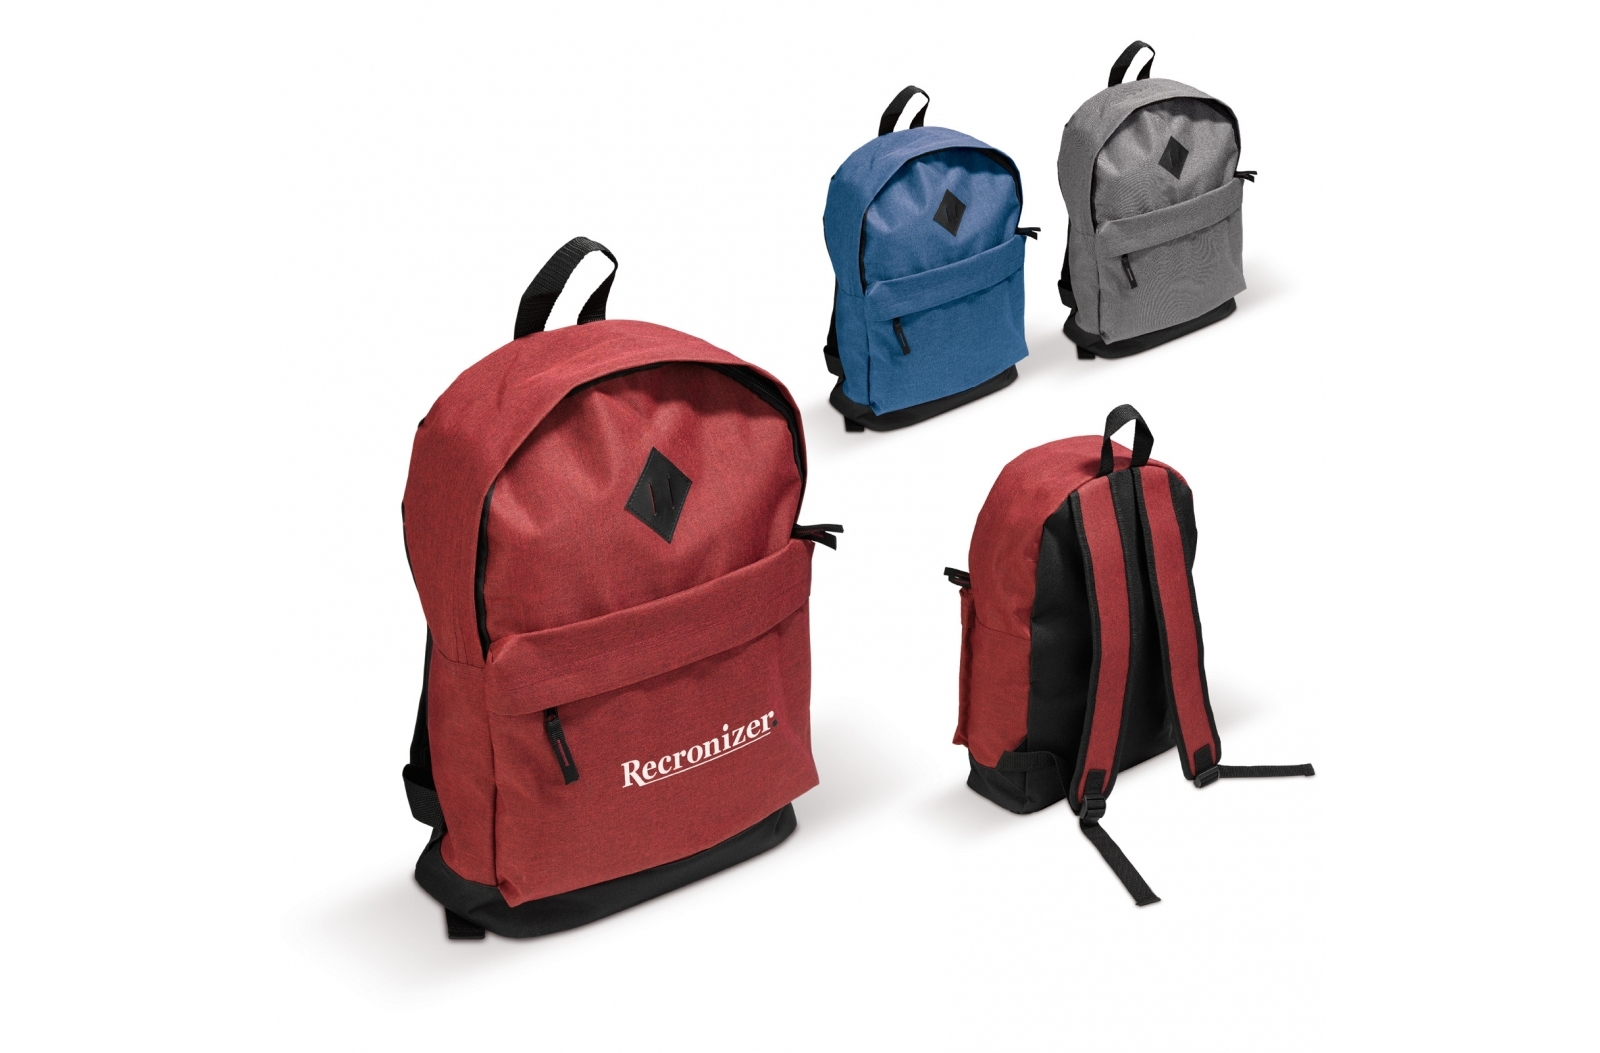 Stylish 300D Polyester Backpack - Greenwich